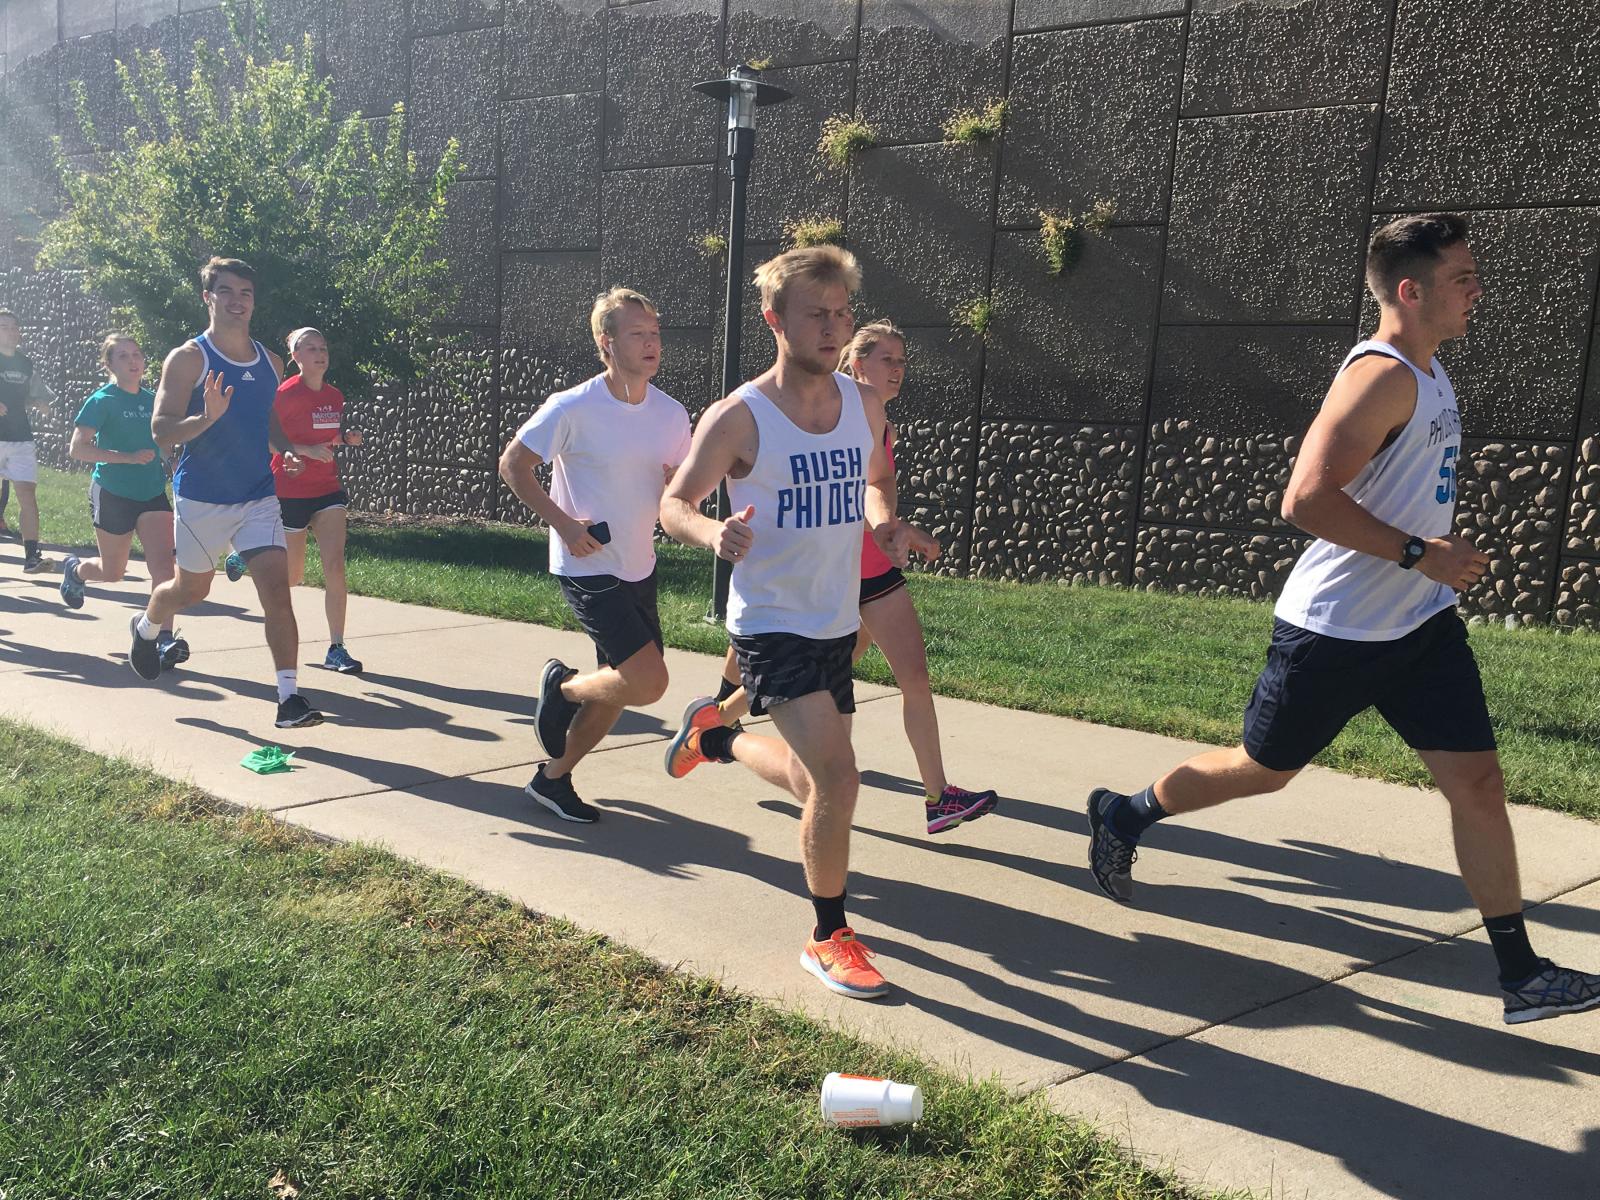 University of Nebraska-Lincoln students participate in a 5k run between the City and East Campuses